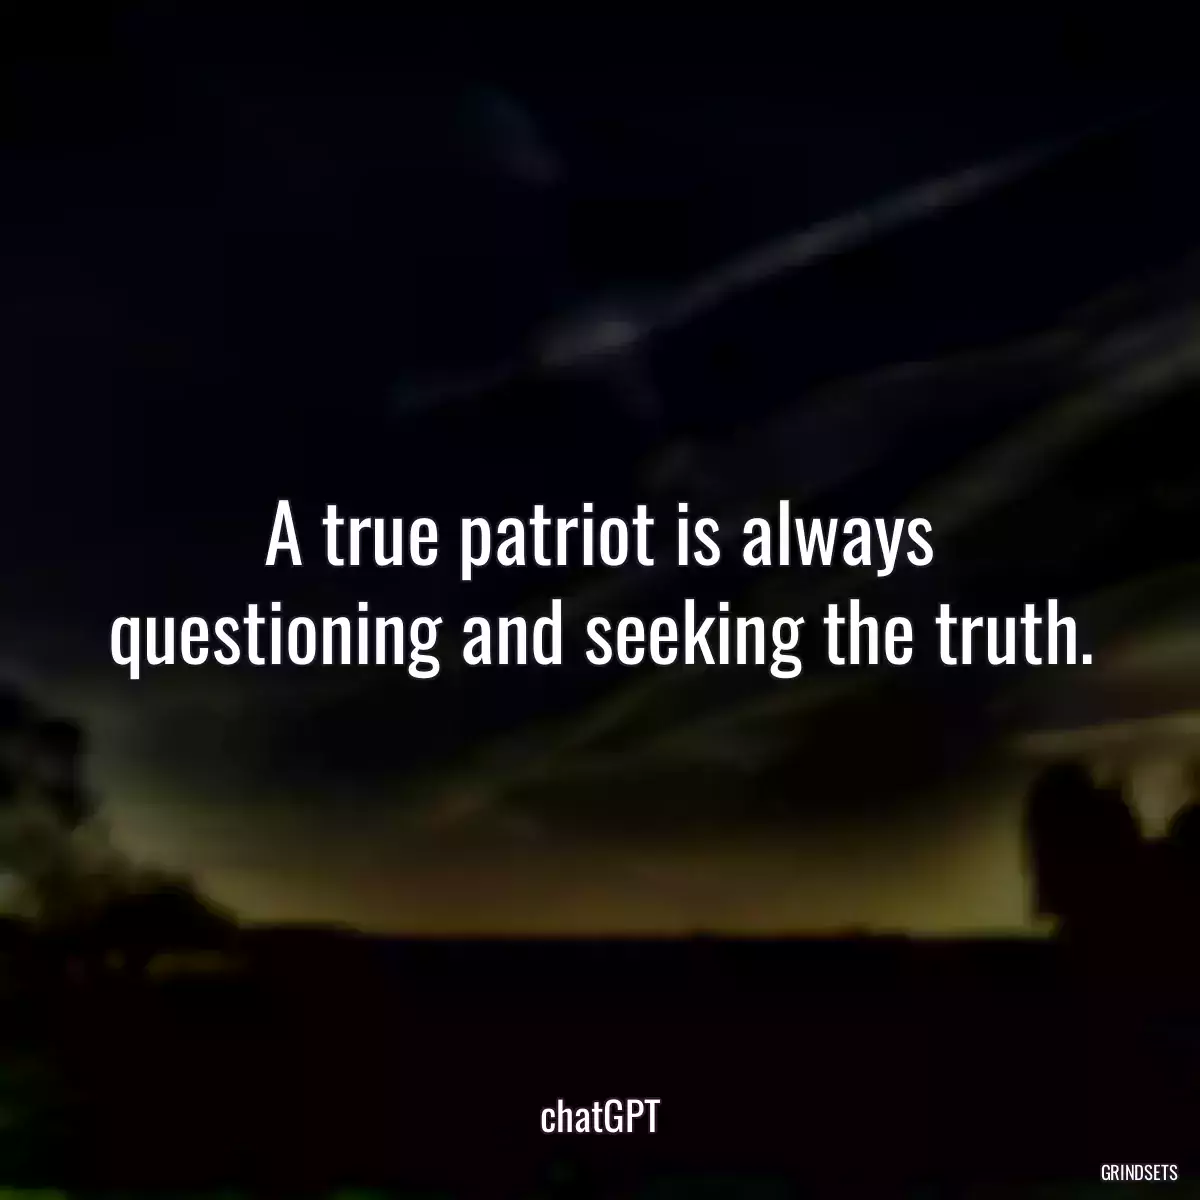 A true patriot is always questioning and seeking the truth.